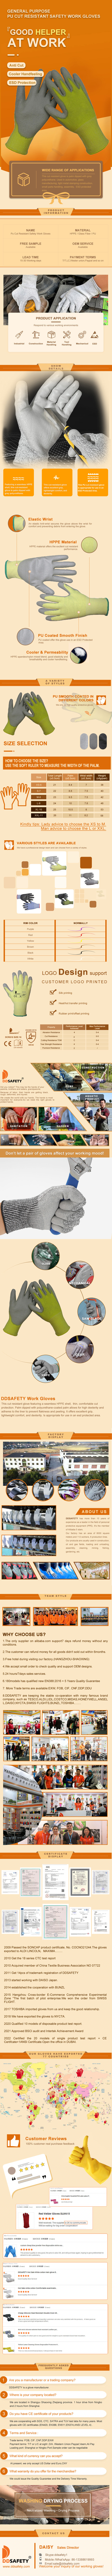 High Visibility Reusable Cut Resistant Work Gloves, Pu Polyurethane Coated - DCR515 High Visibility Reusable Cut Resistant Work Gloves, Pu Polyurethane Coated - DCR515 gloves,cut resistant gloves,pu gloves,polyurethane coated gloves,work gloves